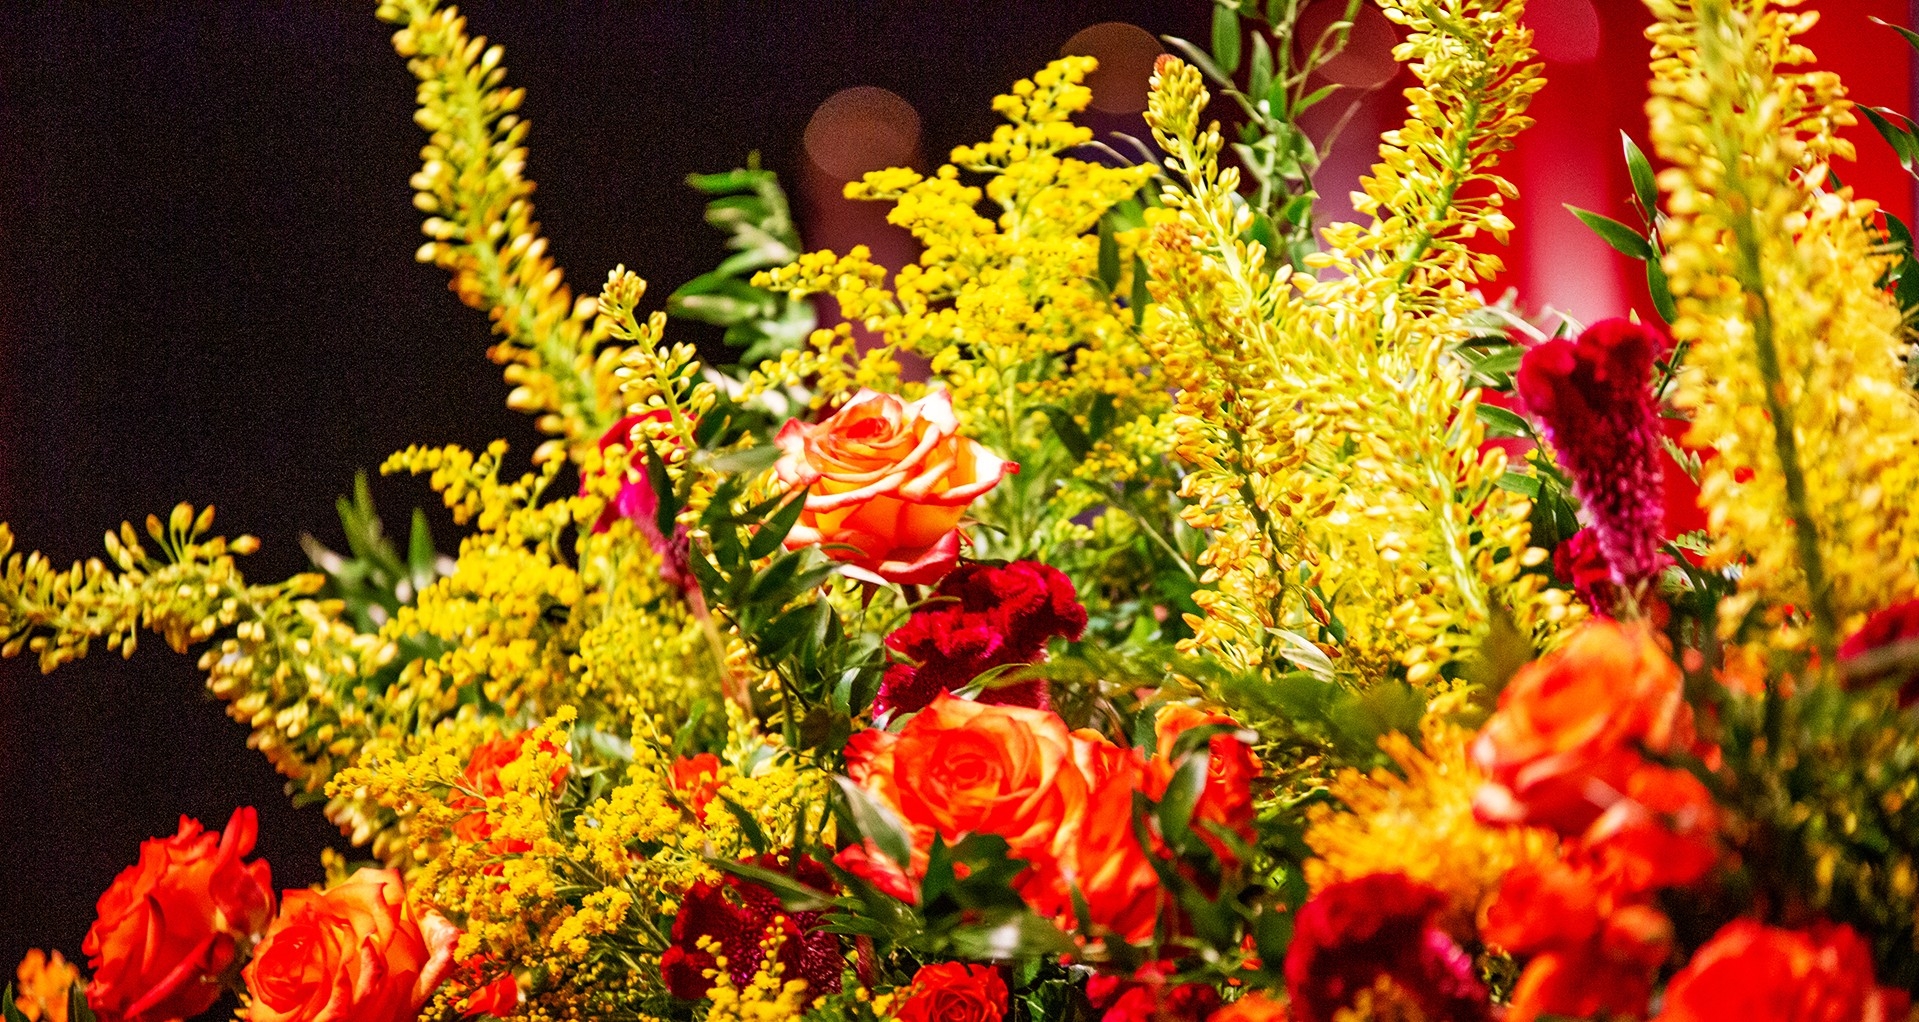 Yellow and orange flowers from the stage at Convocation